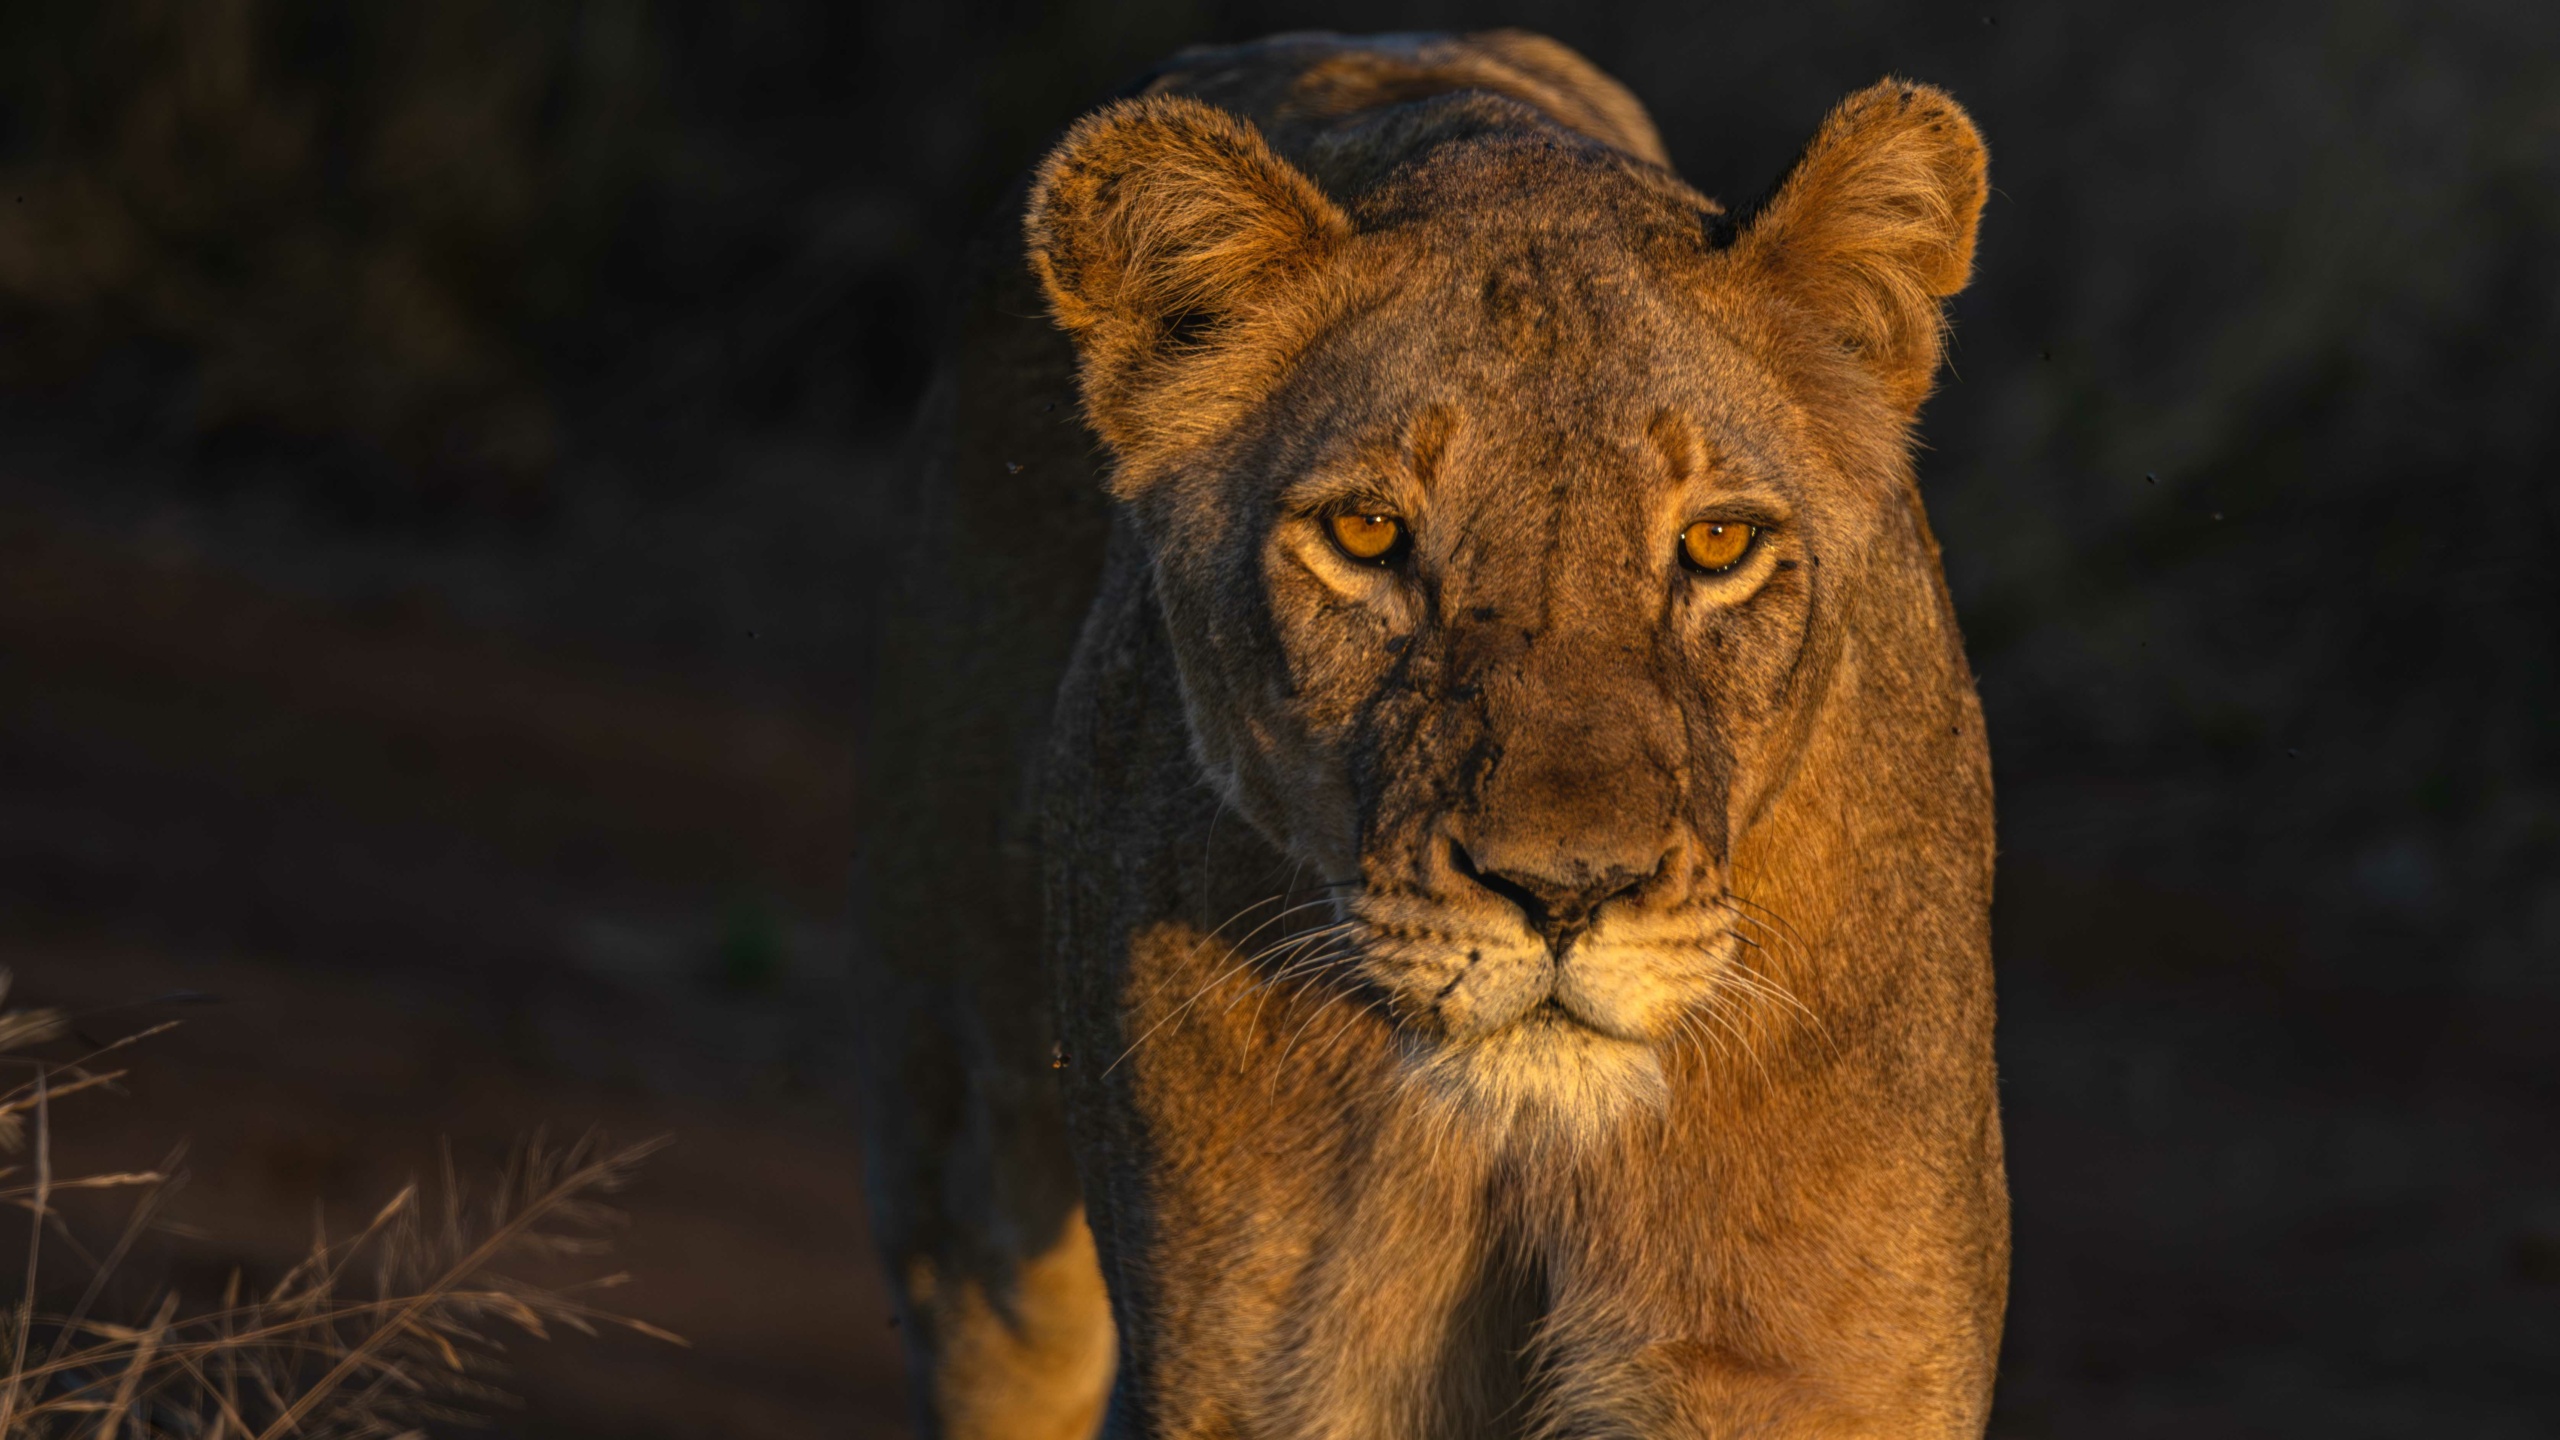 “A lioness gazes intently, her eyes glowing in the warm light of the setting sun, capturing the essence of her majestic and wild beauty.”